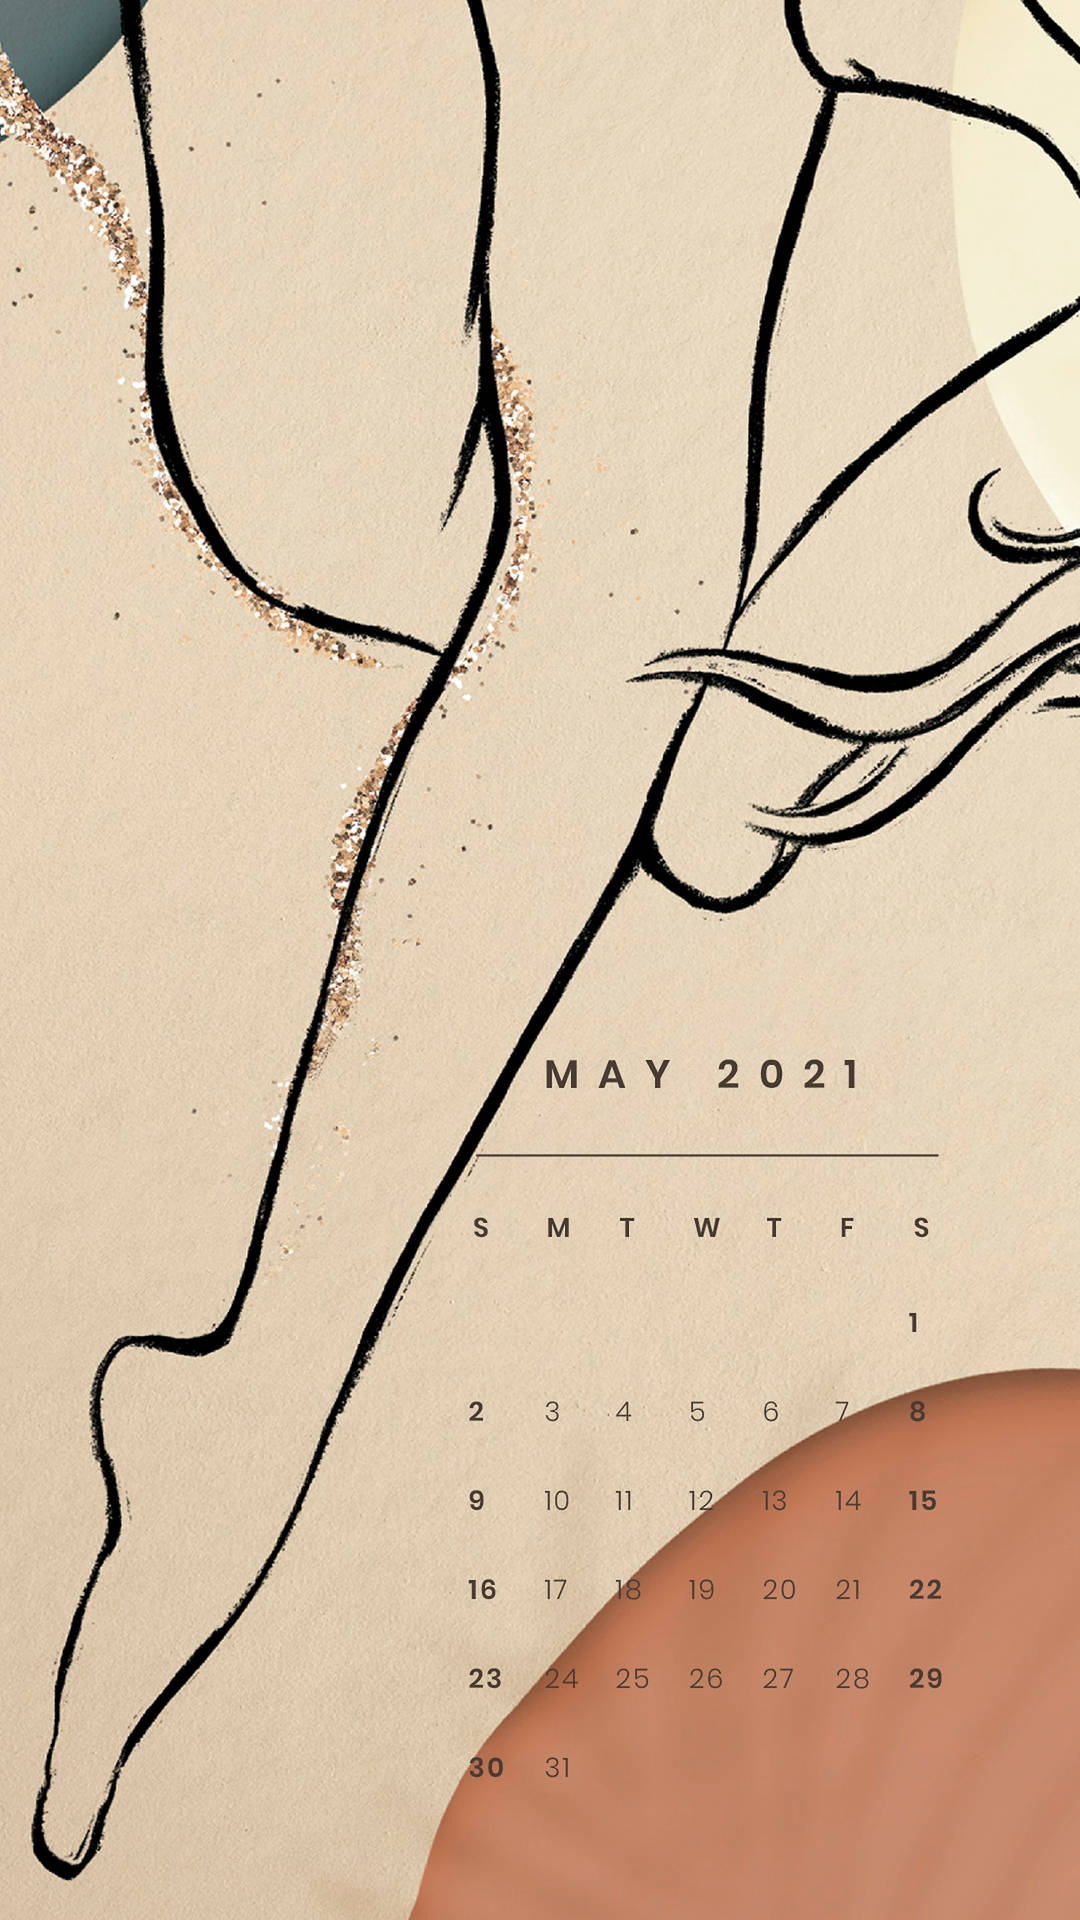 Get Ready For A Time Of Adventure And Fun With This May 2021 Calendar! Background